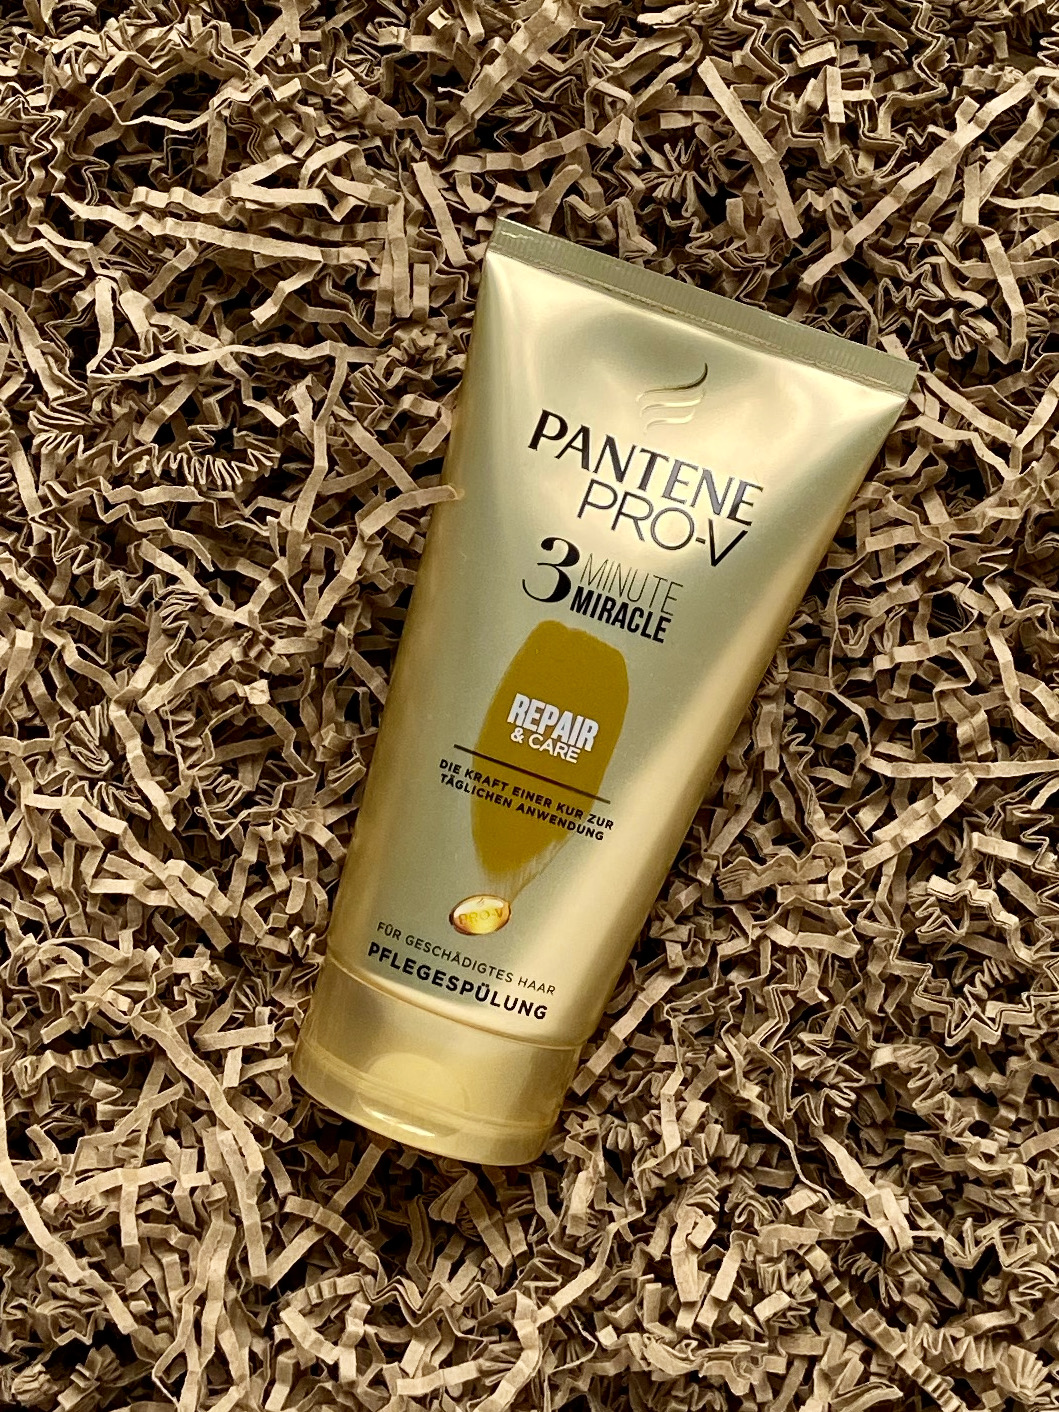 Pantene Pro-V 3 Minute Miracle Repair&Care Pflegespülung